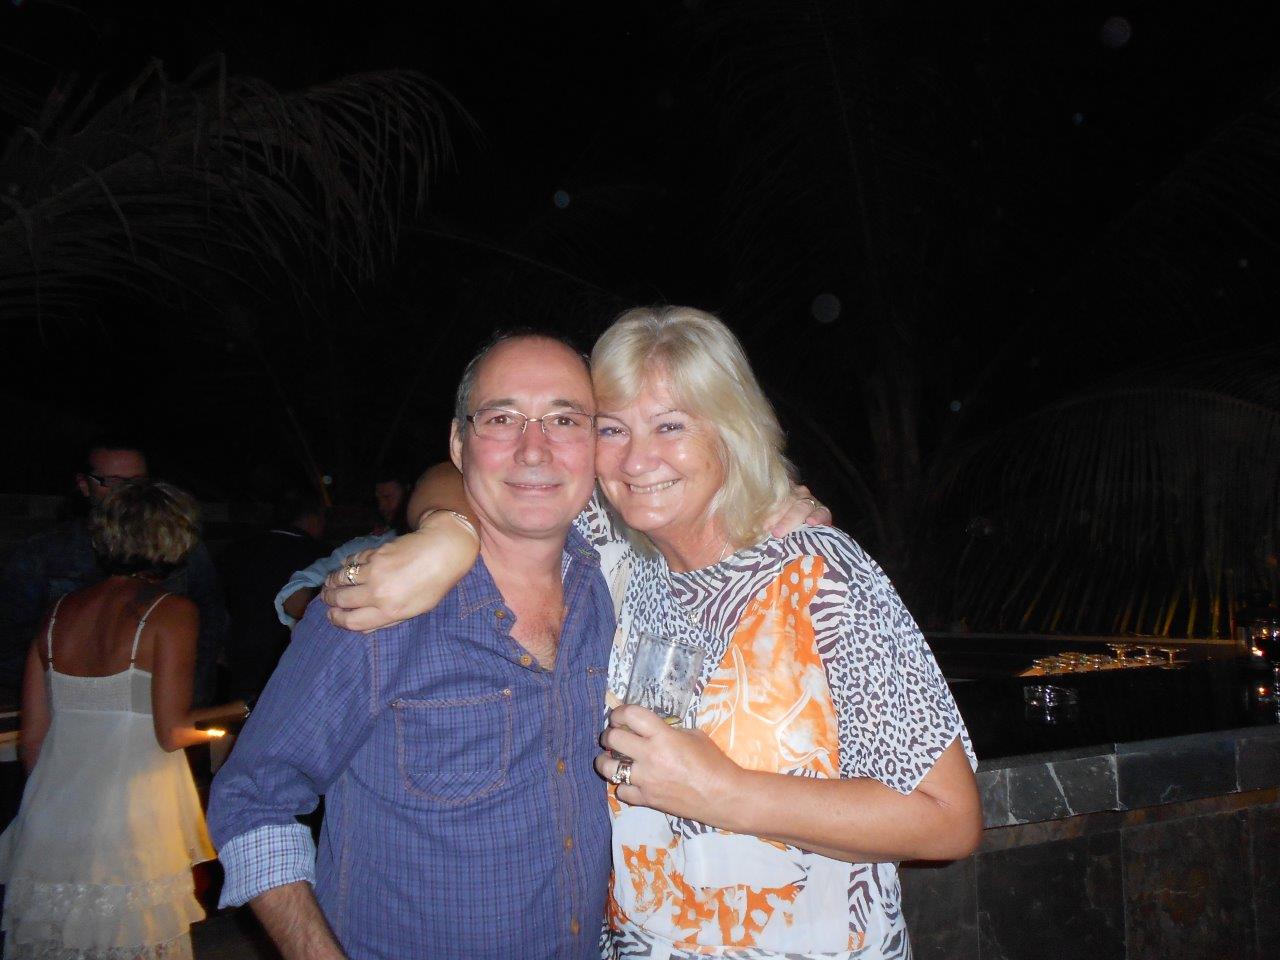 Tim Smythe RIP - the producer who bought filming to Dubai and I am so fortunate that he was my dear friend.You will greatly missed but always in my heart